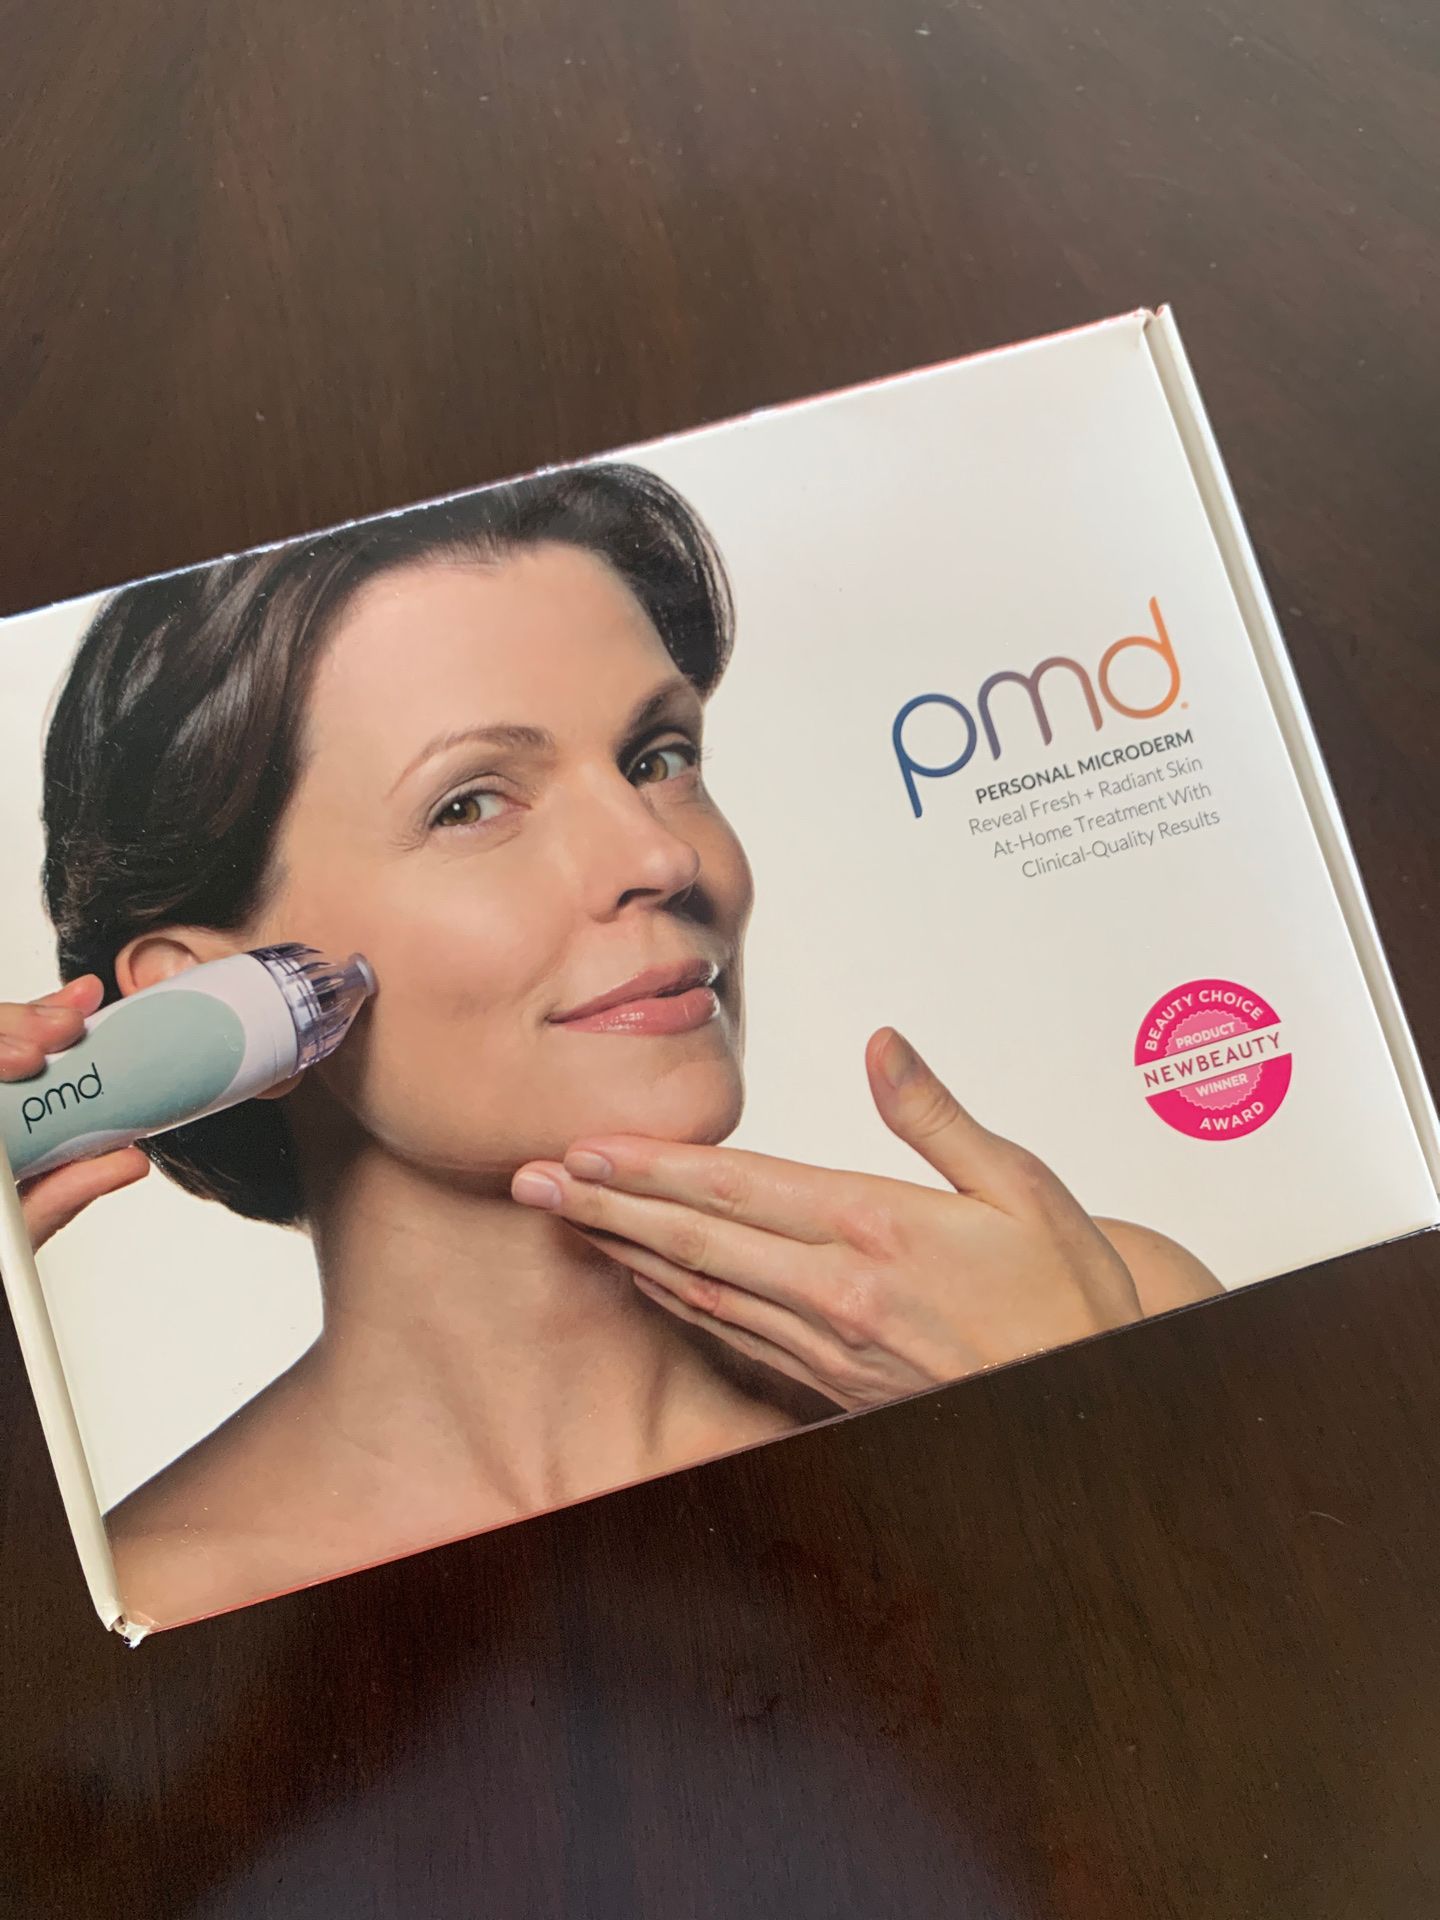 PMD personal microdermabrasion device